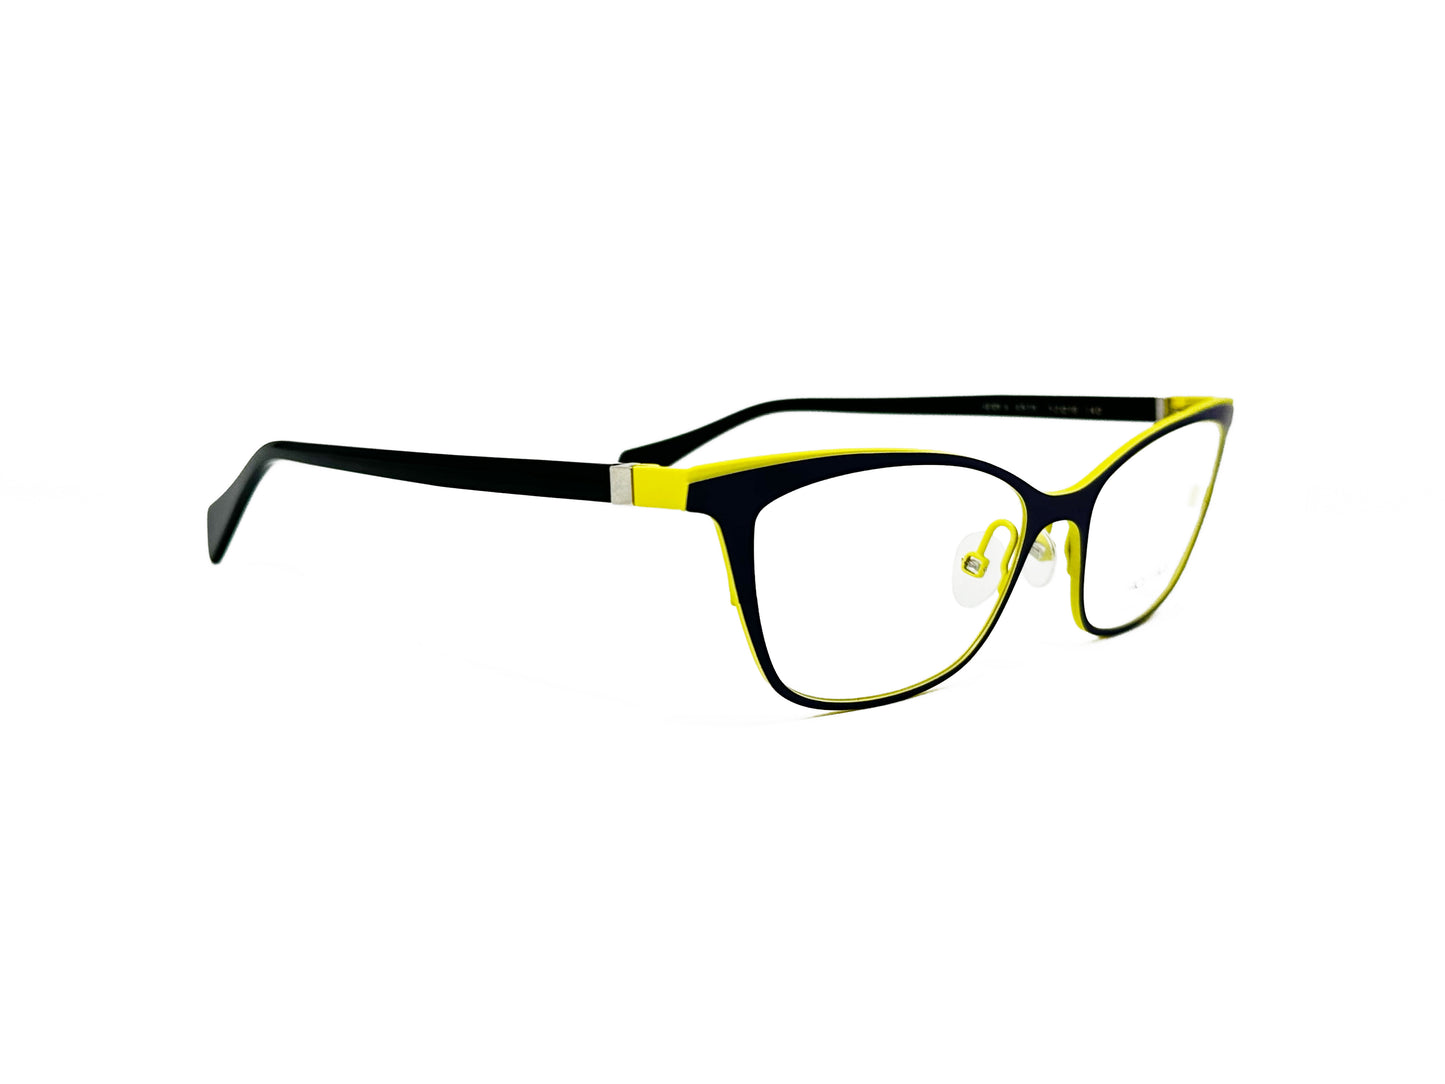 Face a Face rectangular, with slight cat-eye, acetate, optical frame. Model: Heidi4. Color: 9515 - Black with neon yellow lining on top. Side view.